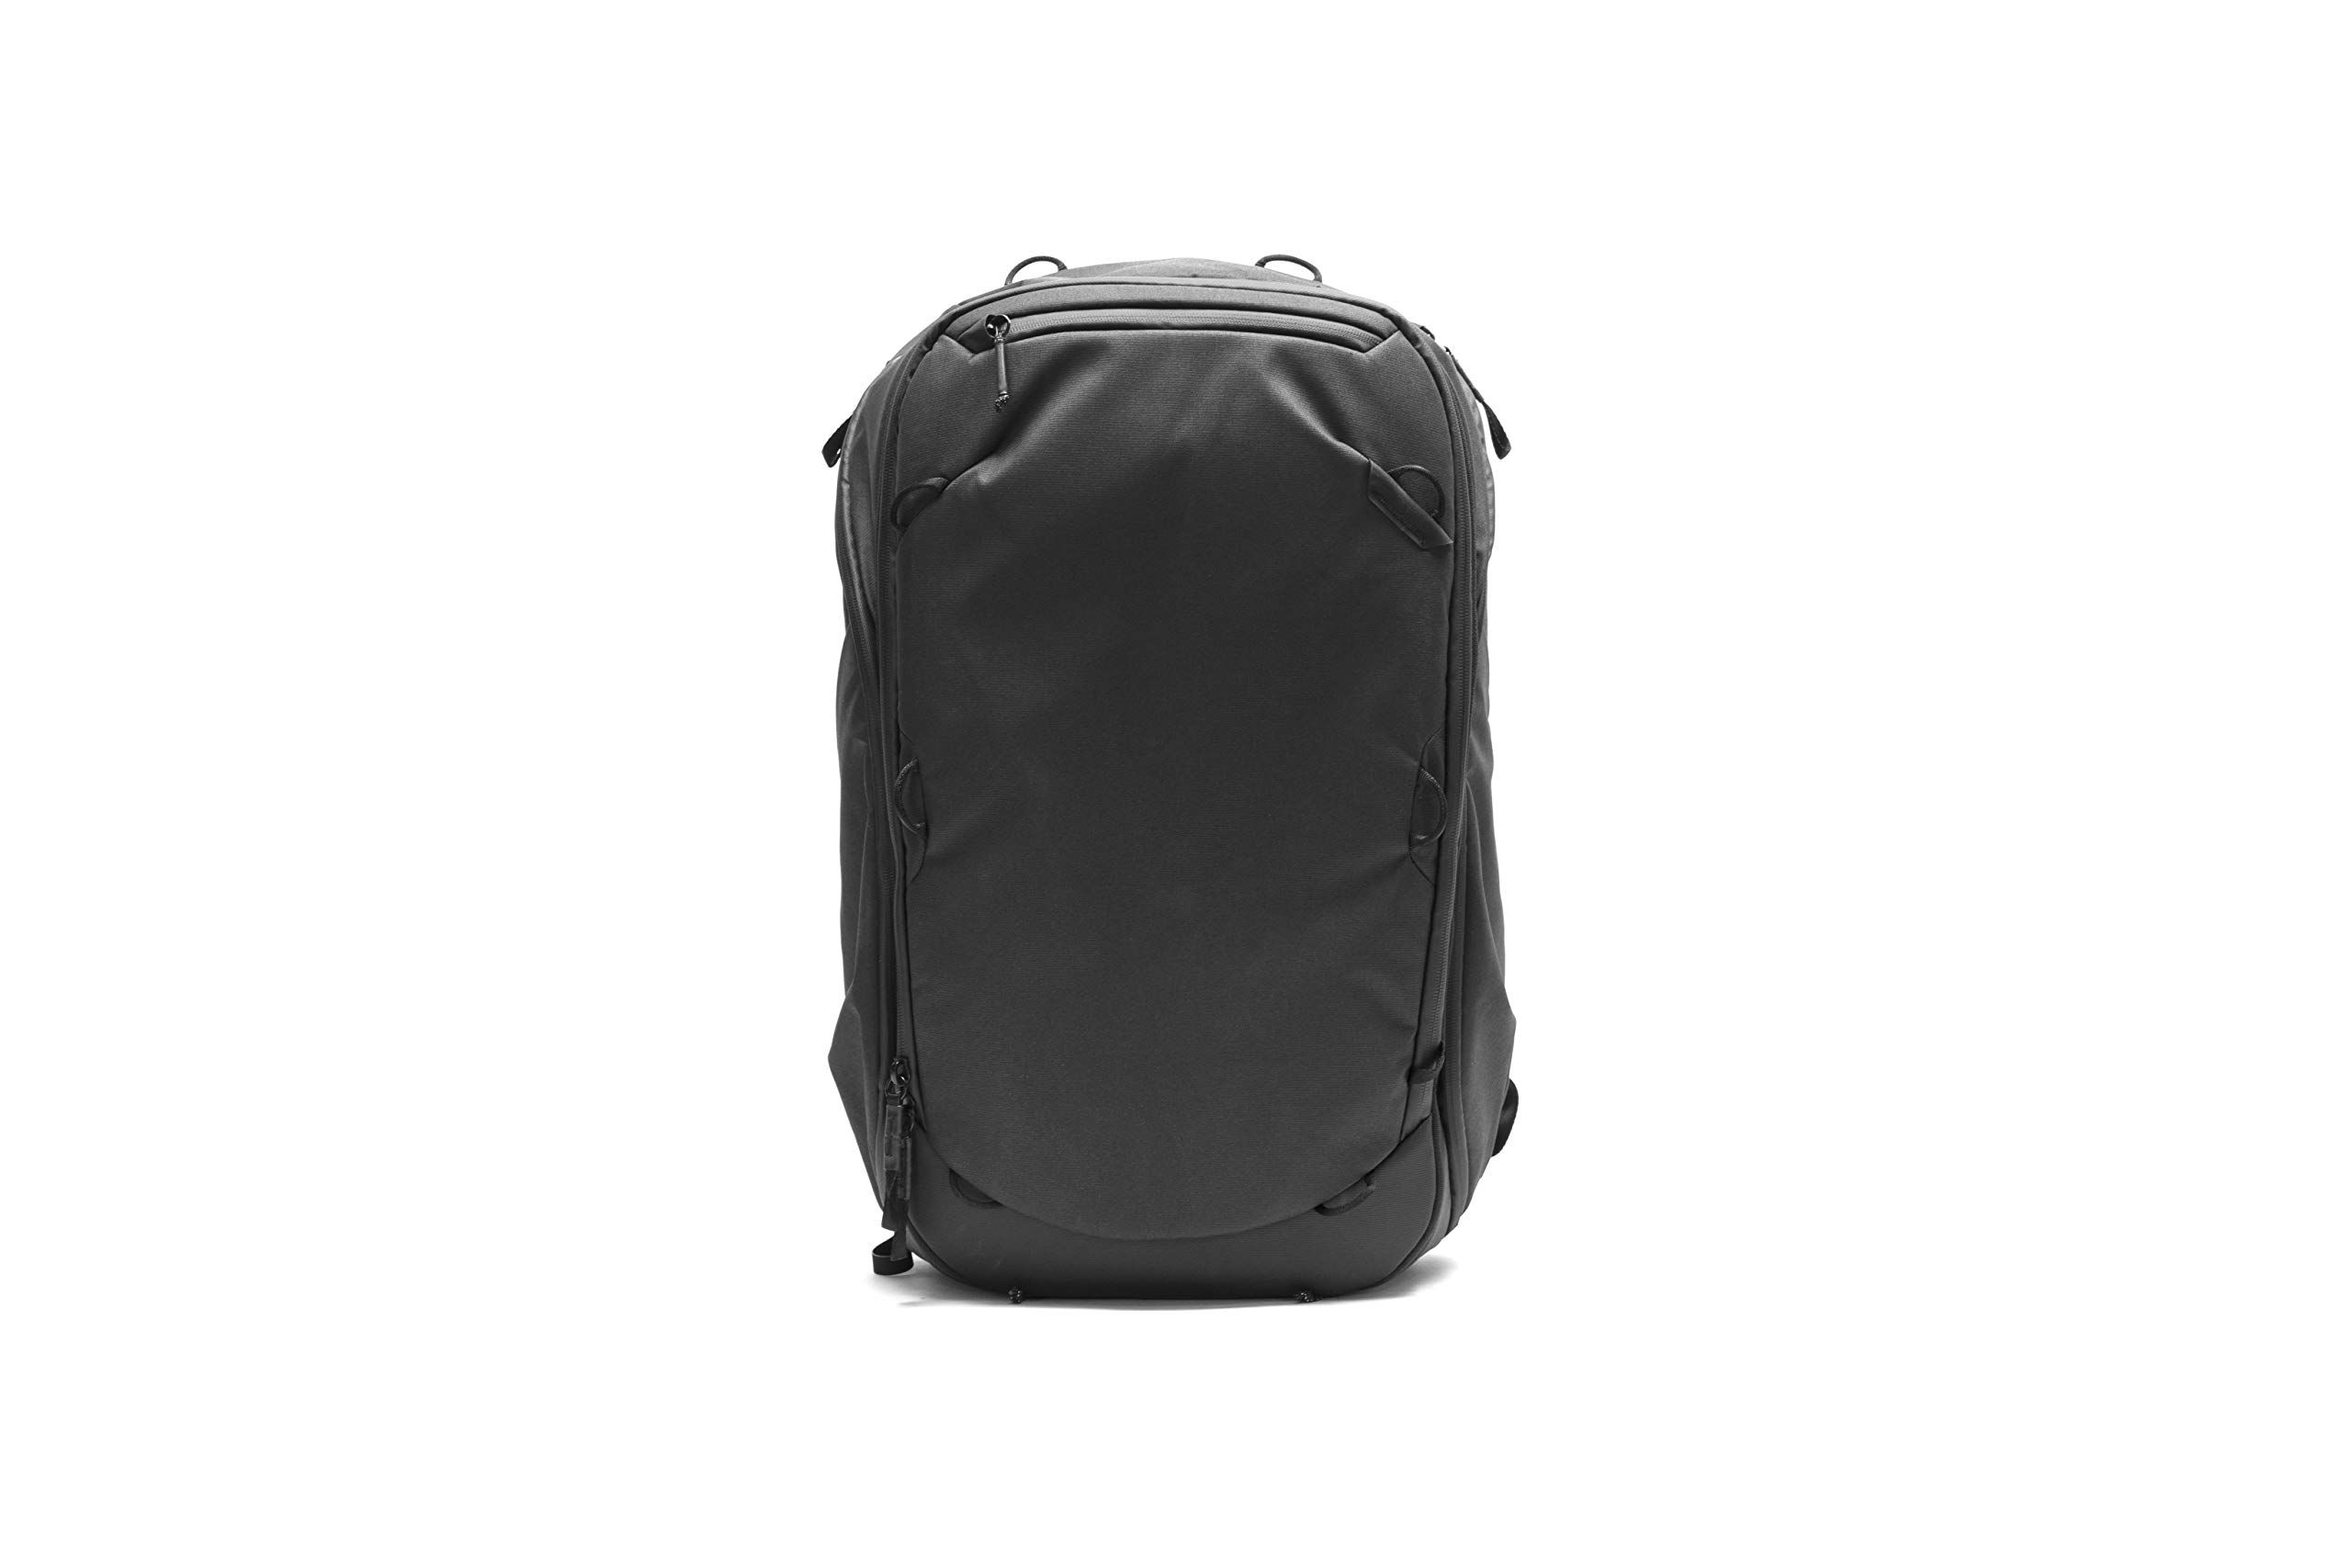 <p><strong>$299.95</strong></p><p>Designed with intention, Peak Design's travel backpack is truly a standout within the industry. <strong>While it's hard to find a travel bag that can tackle all sorts of trips, this one manages to do just that</strong>. It's truly one-of-a-kind and allows you to access your belongings from the front (like a suitcase), the back (like a top-loading traditional backpack) and the sides. </p><p>Compression features allow you to easily convert it from a 30L capacity to a 35L or 45L bag for all your travel needs. The backpack straps can be hidden away to keep it streamlined while using the simple luggage sleeve. The only challenge comes with packing: While the interior is spacious, there aren't too many separate compartments, so if that's important to you, the brand offers a selection of compatible <a href="https://www.amazon.com/Peak-Design-Packing-Cube-Medium/dp/B07GH5M6PF?tag=syndication-20&ascsubtag=%5Bartid%7C10055.g.31673527%5Bsrc%7Cmsn-us">packing cubes</a>, including <a href="https://www.amazon.com/Peak-Design-Camera-Cube-Medium/dp/B07GH3W9QT?tag=syndication-20&ascsubtag=%5Bartid%7C10055.g.31673527%5Bsrc%7Cmsn-us">protective ones</a> for camera equipment.</p>